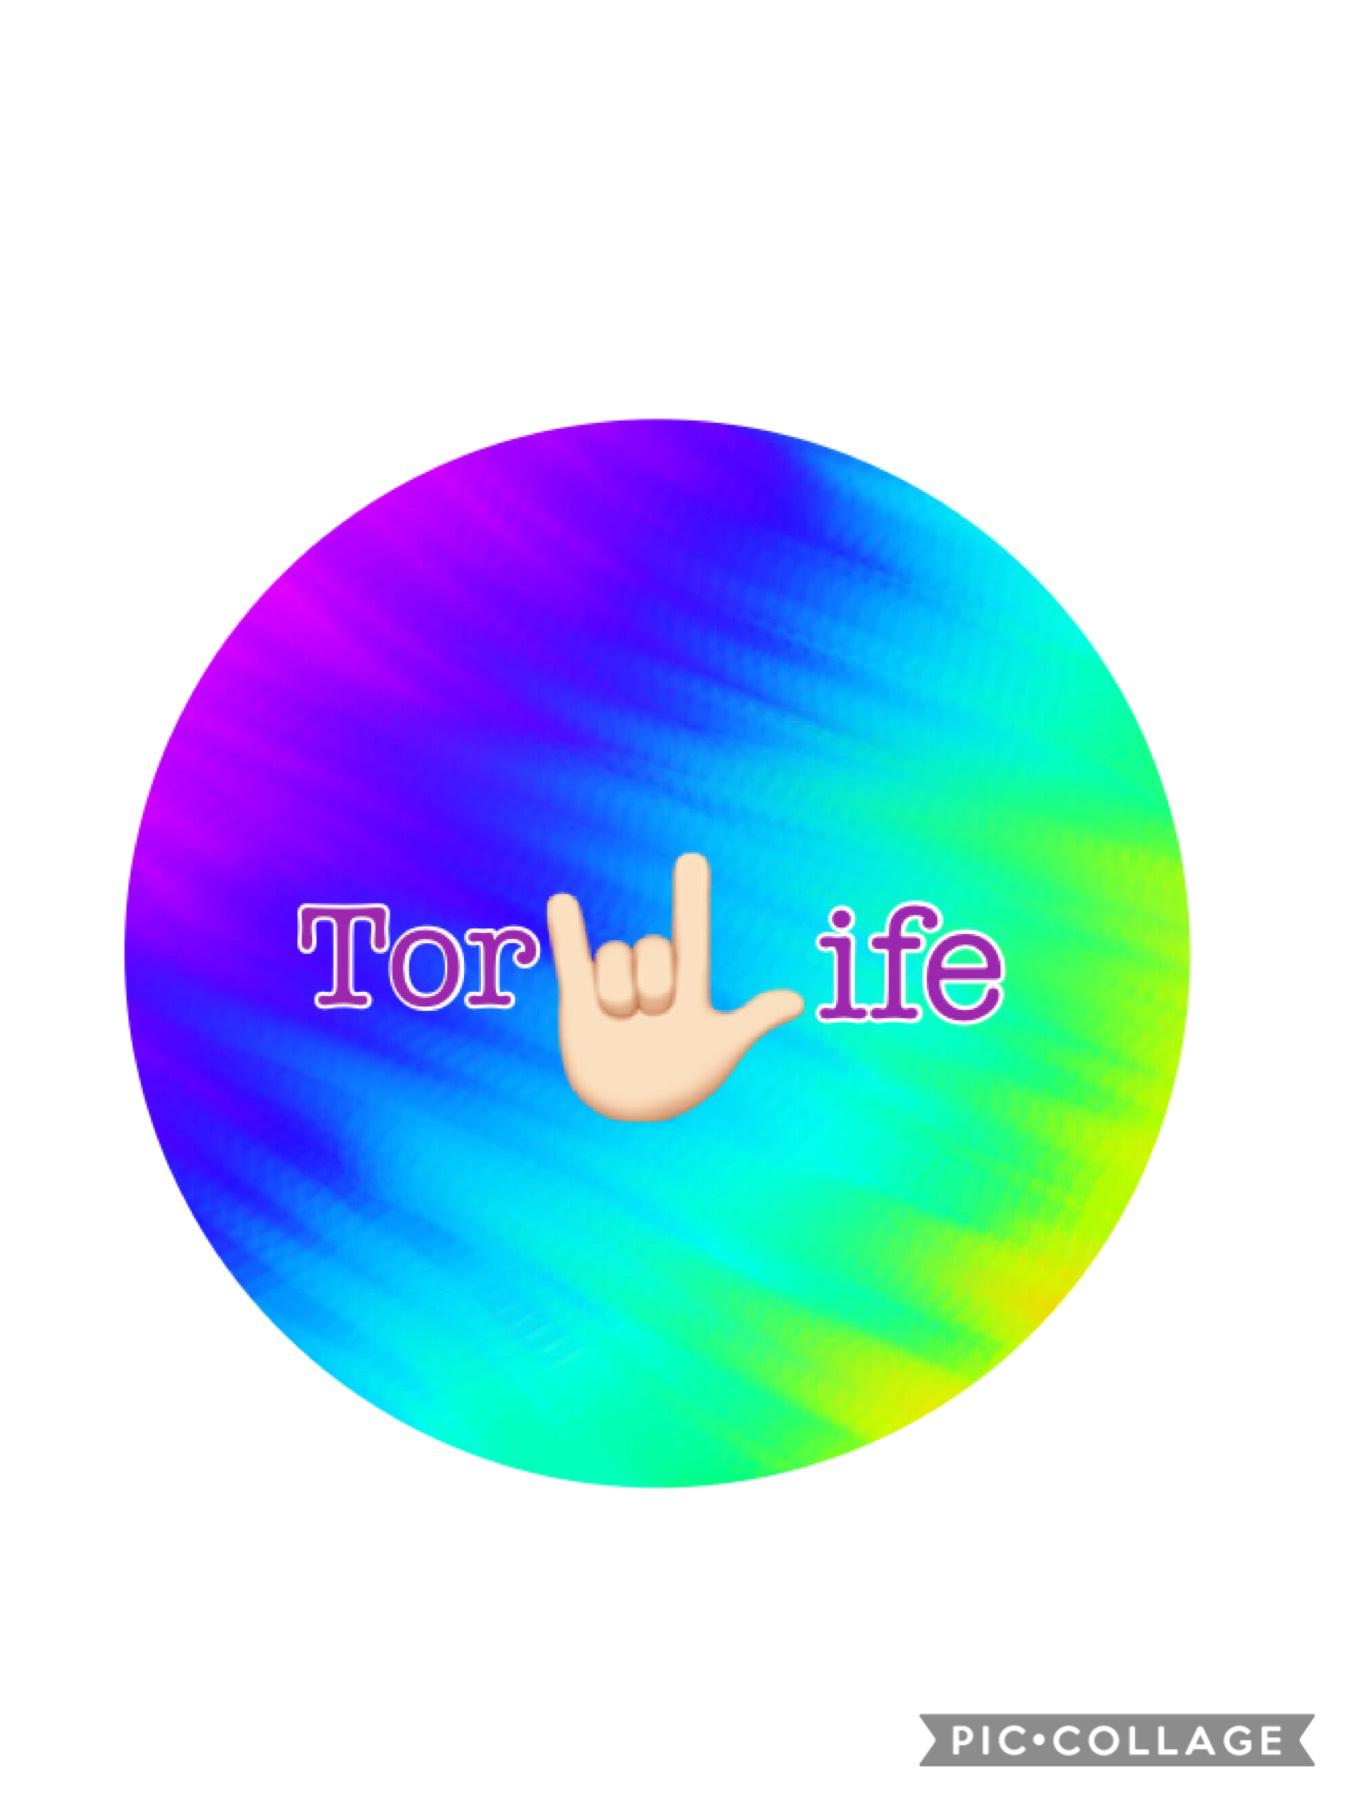 Tap
I keep saying that that is my last post and I keep lying just tell me in the comments if this is a cool icon thing and ummmm ya